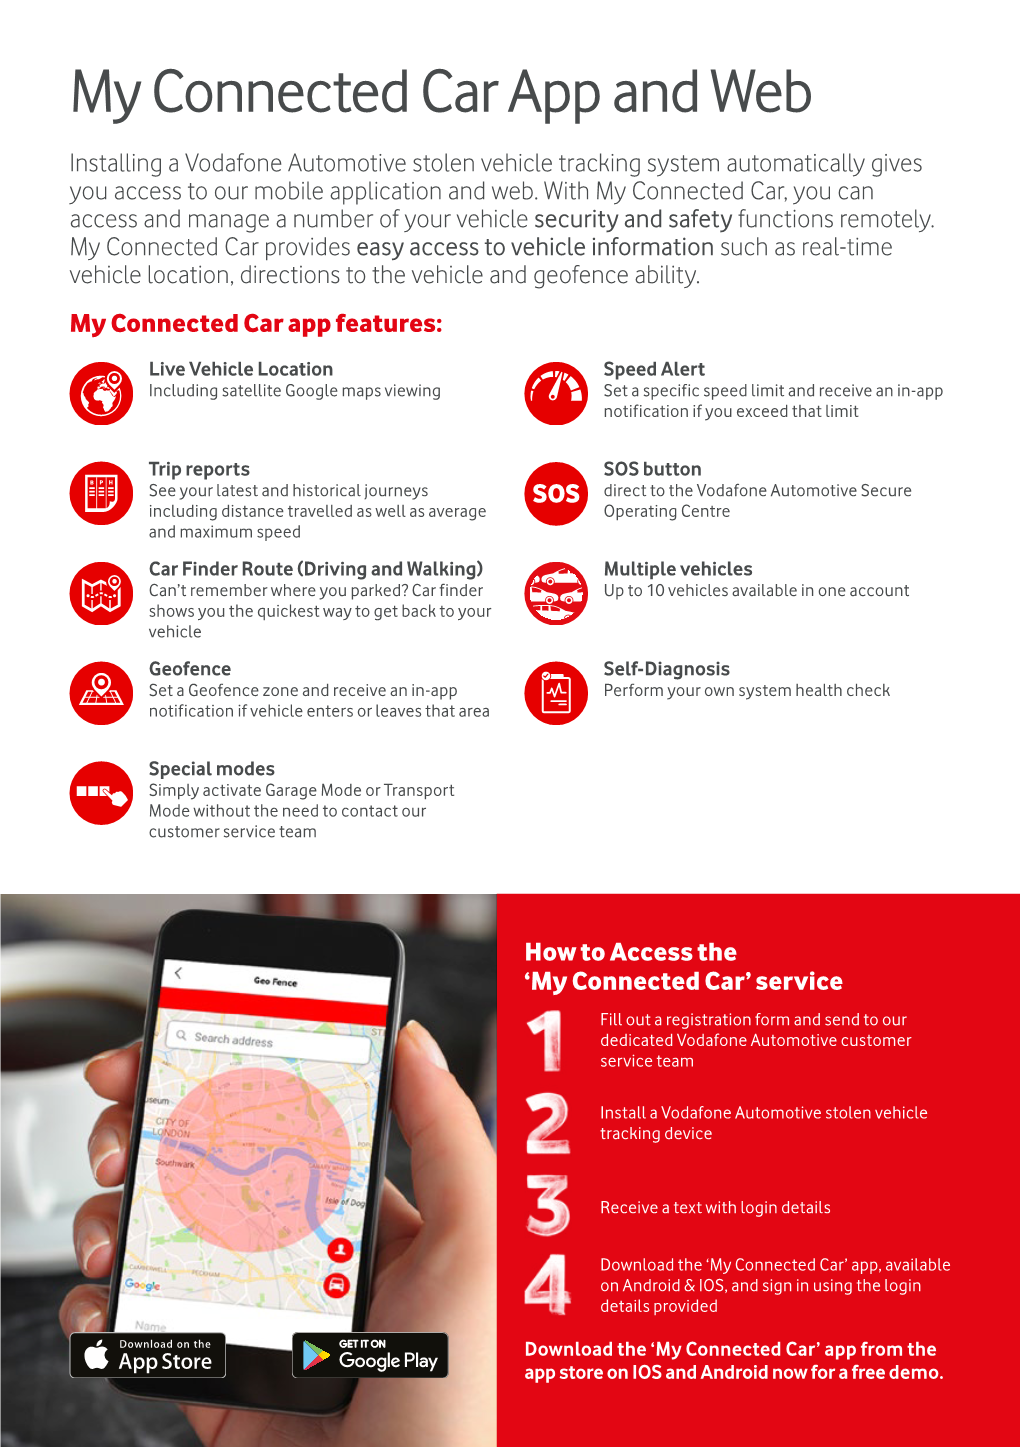 My Connected Car App and Web Installing a Vodafone Automotive Stolen Vehicle Tracking System Automatically Gives You Access to Our Mobile Application and Web